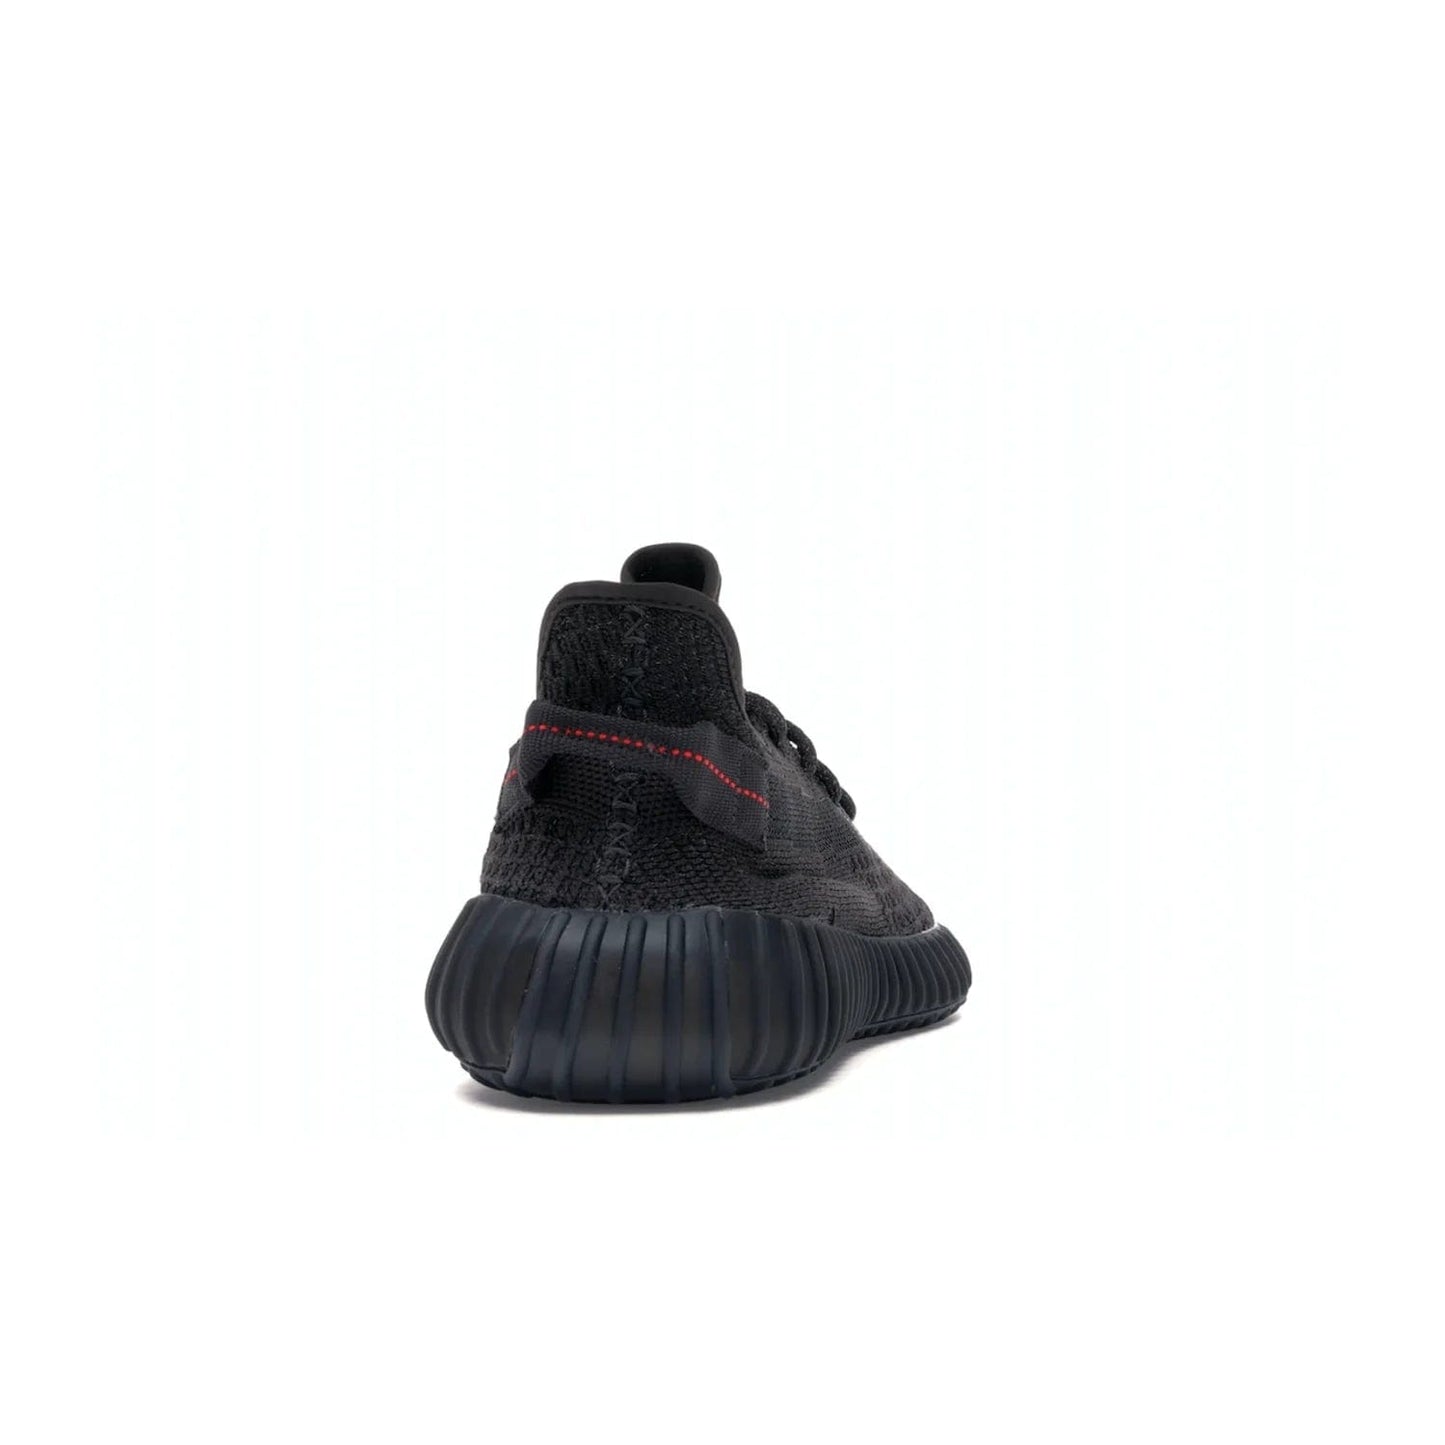 adidas Yeezy Boost 350 V2 Static Black (Reflective) - Image 29 - Only at www.BallersClubKickz.com - Make a statement with the adidas Yeezy Boost 350 V2 Static Black Reflective. All-black upper, reflective accents, midsole, and sole combine for a stylish look. High quality materials. June 2019 release. Add to your collection today.